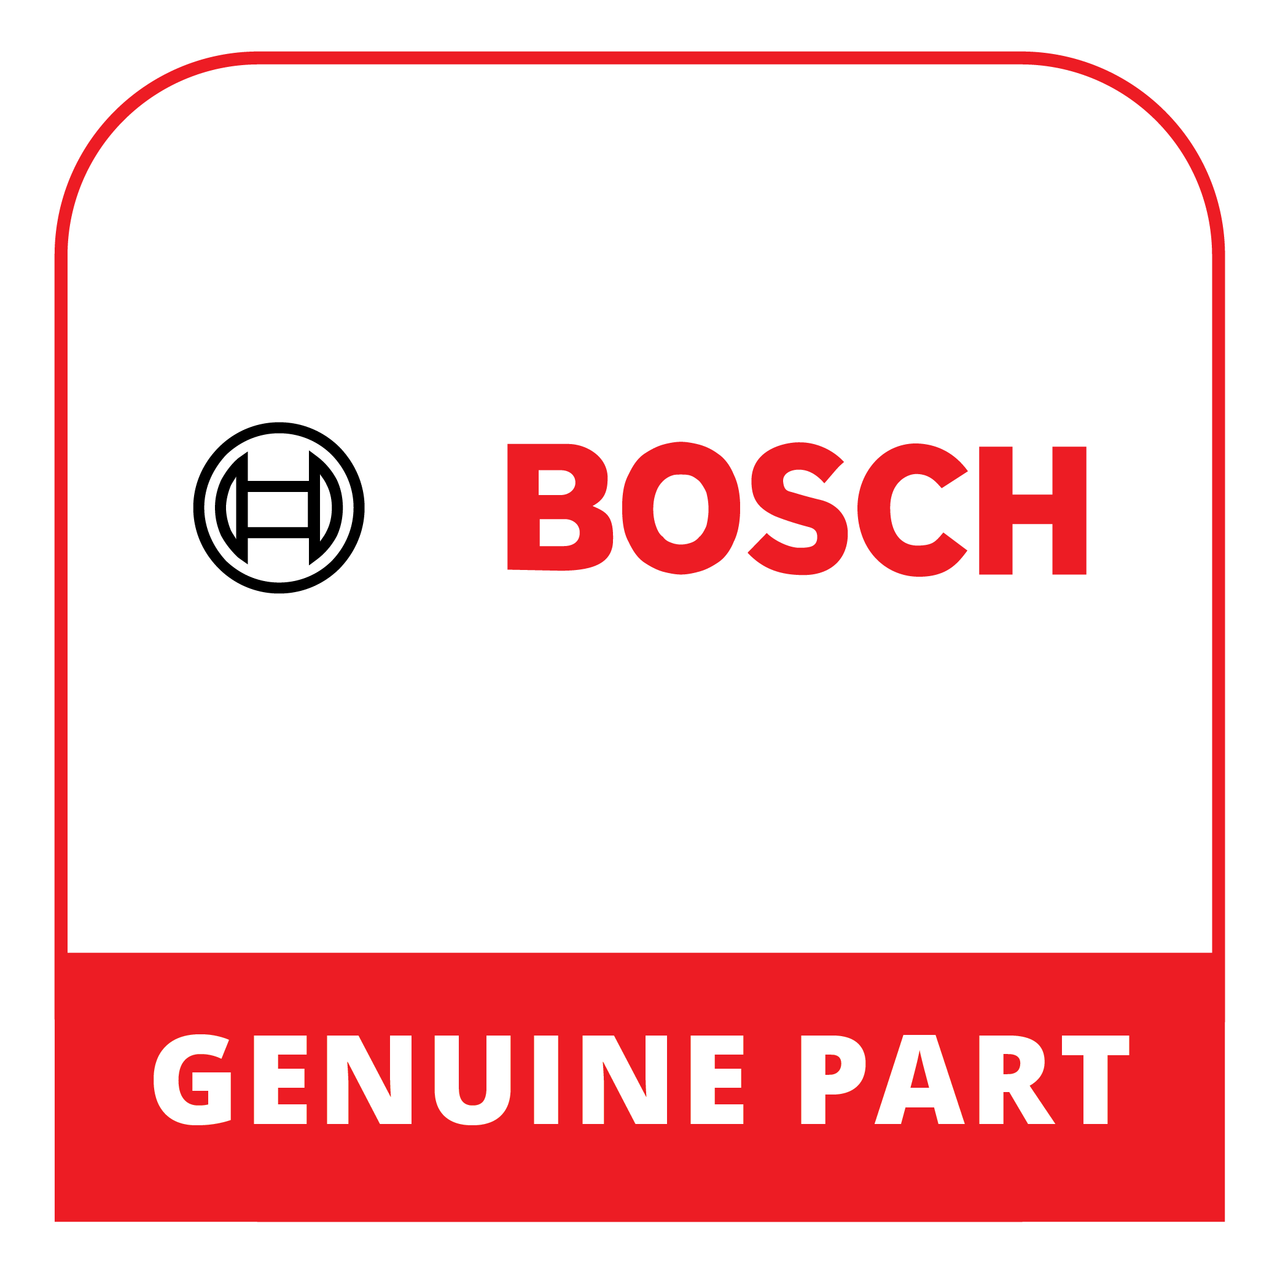 Bosch (Thermador) 18064151 - Installation Instructions - Genuine Bosch (Thermador) Part